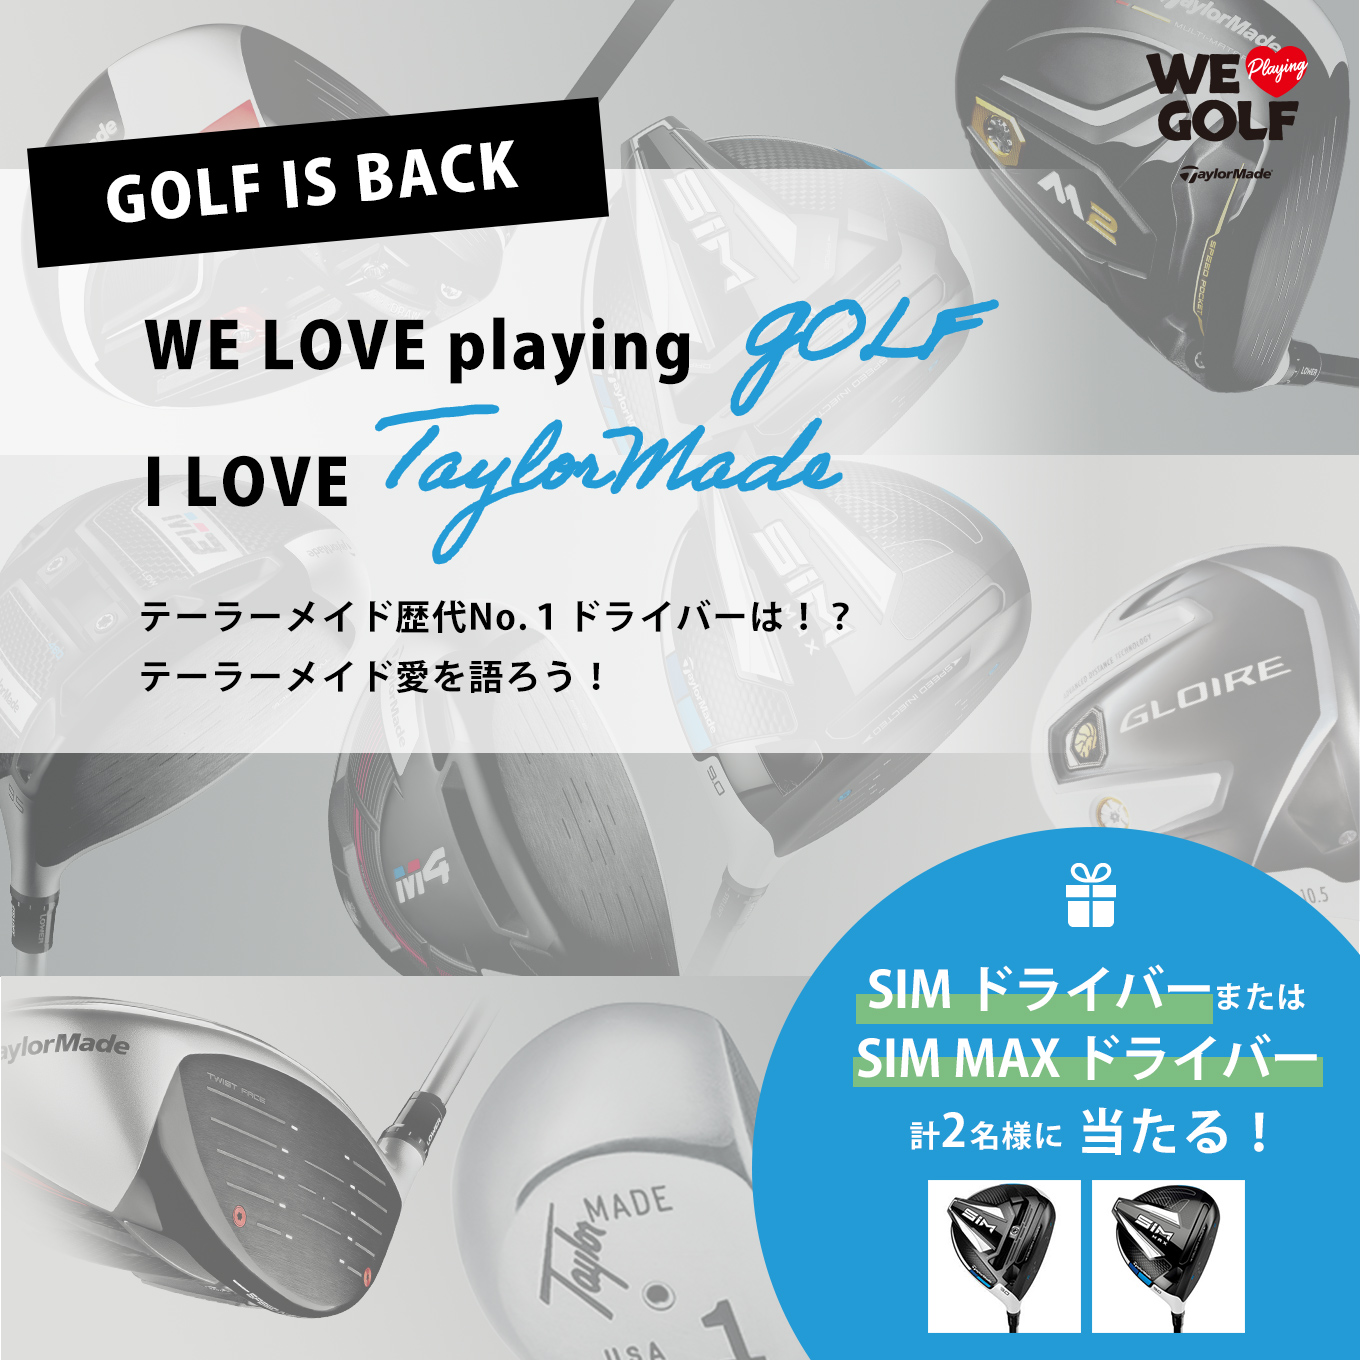 WE LOVE playing golf I LOVE TaylorMade